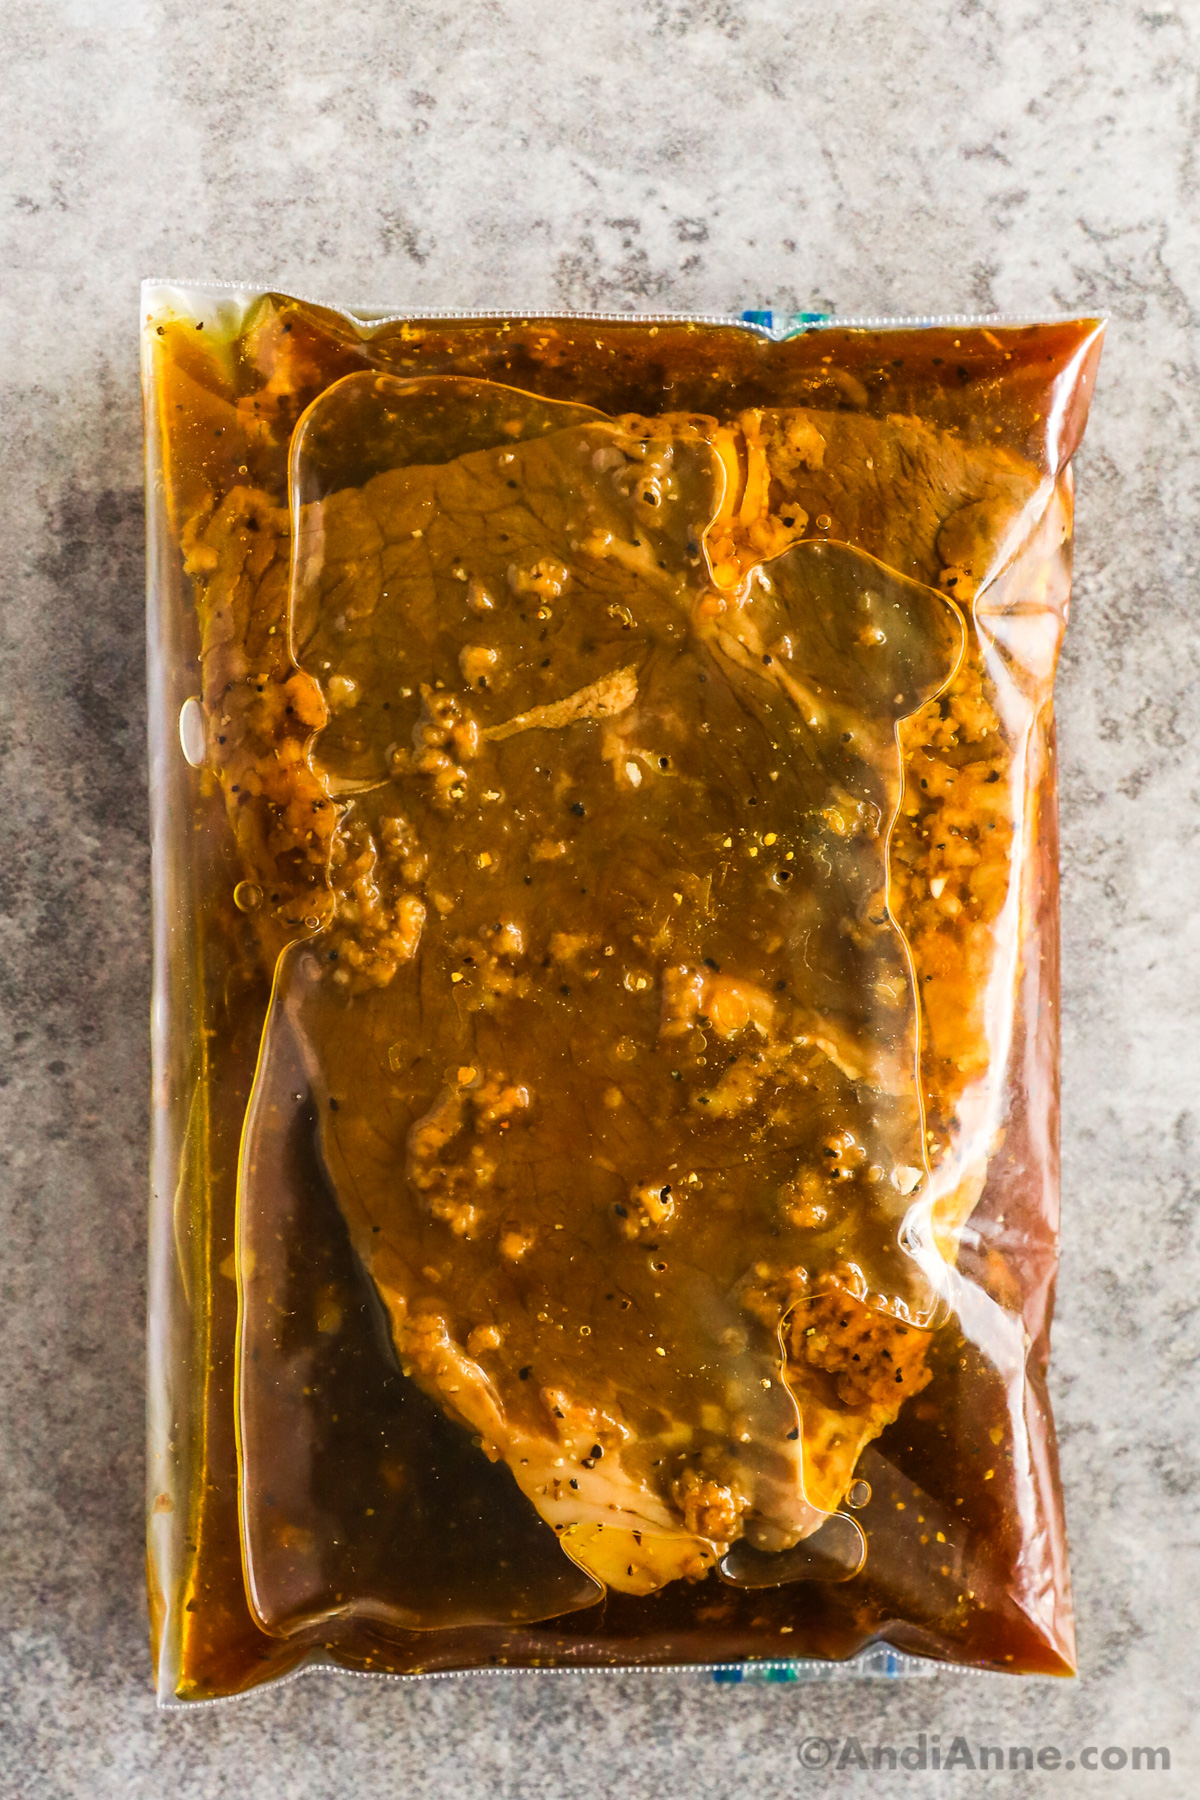 Close up of steak and marinade inside a plastic bag.